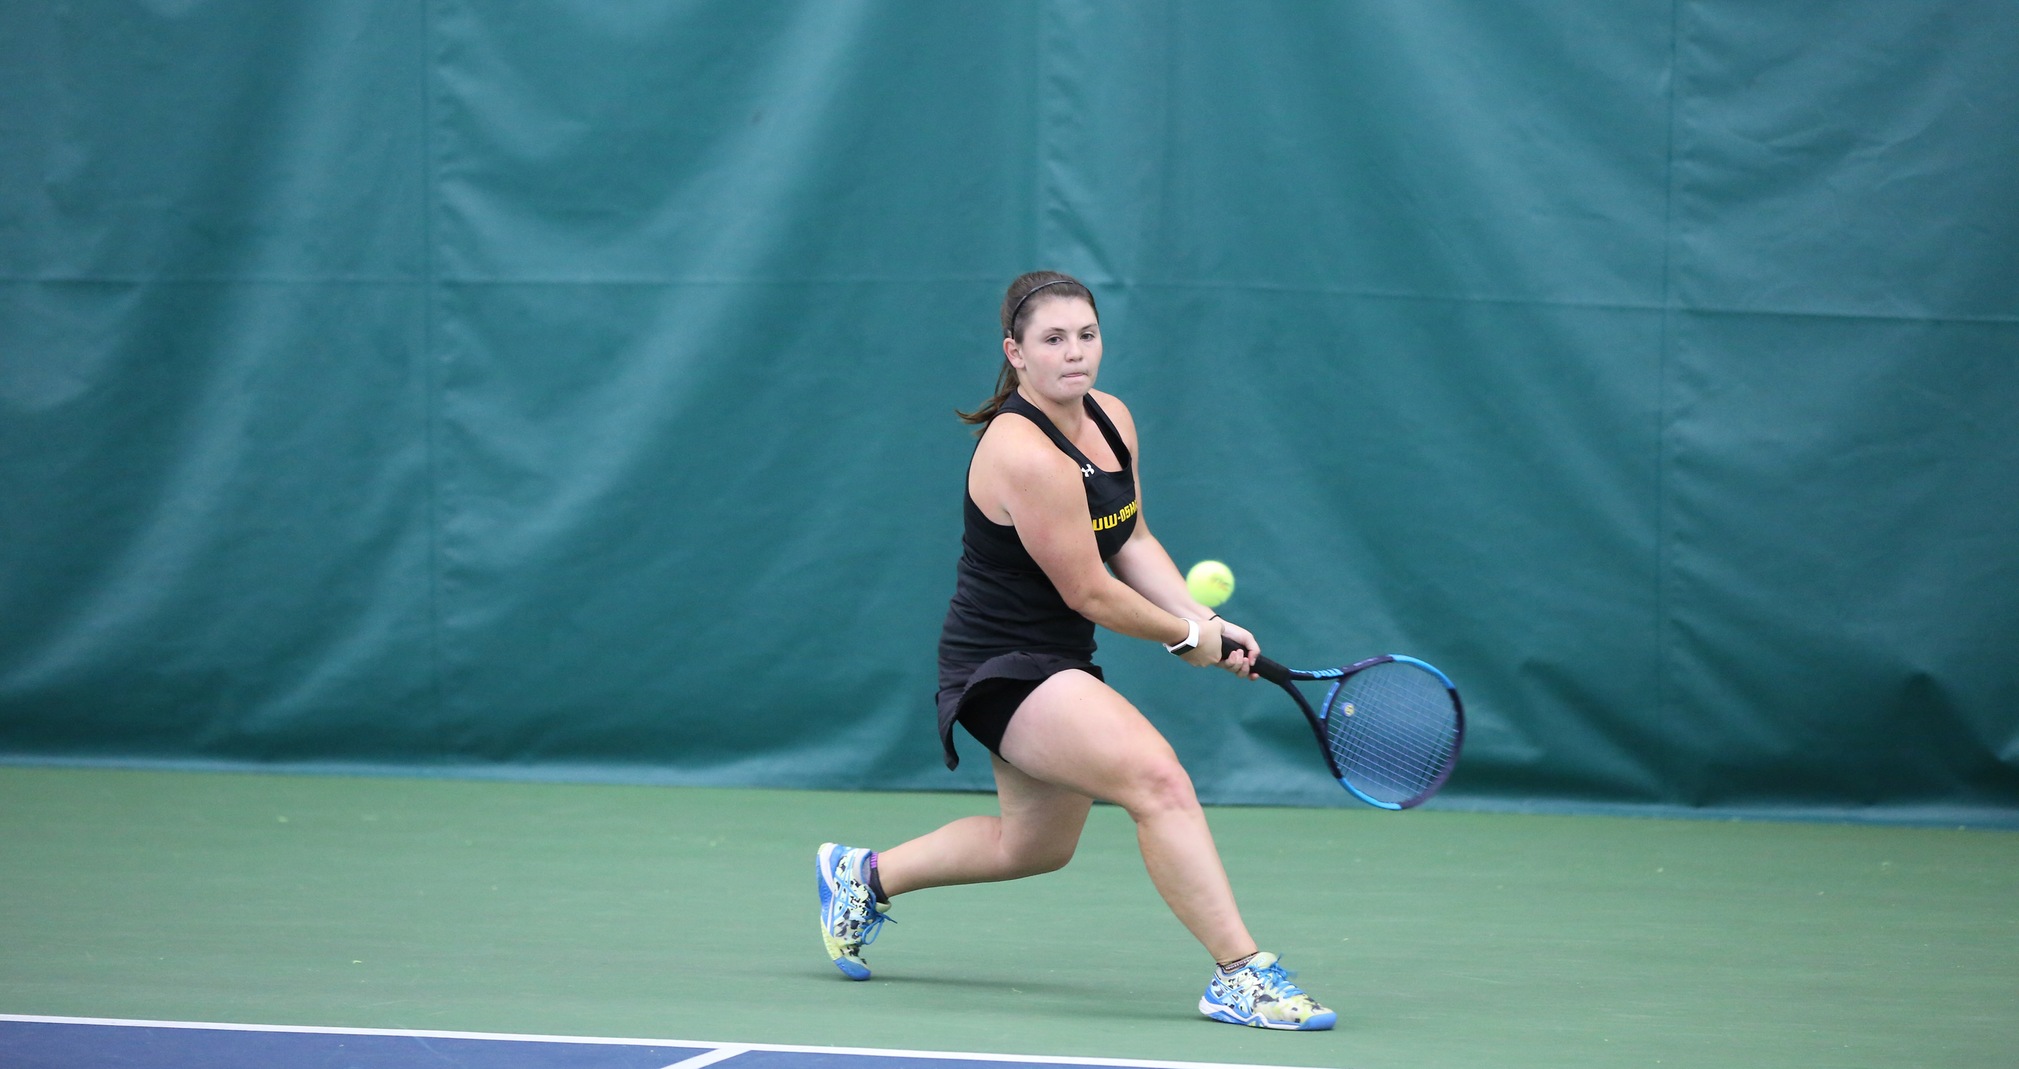 Samantha Koppa was the winner at No. 2 singles for the Titans.